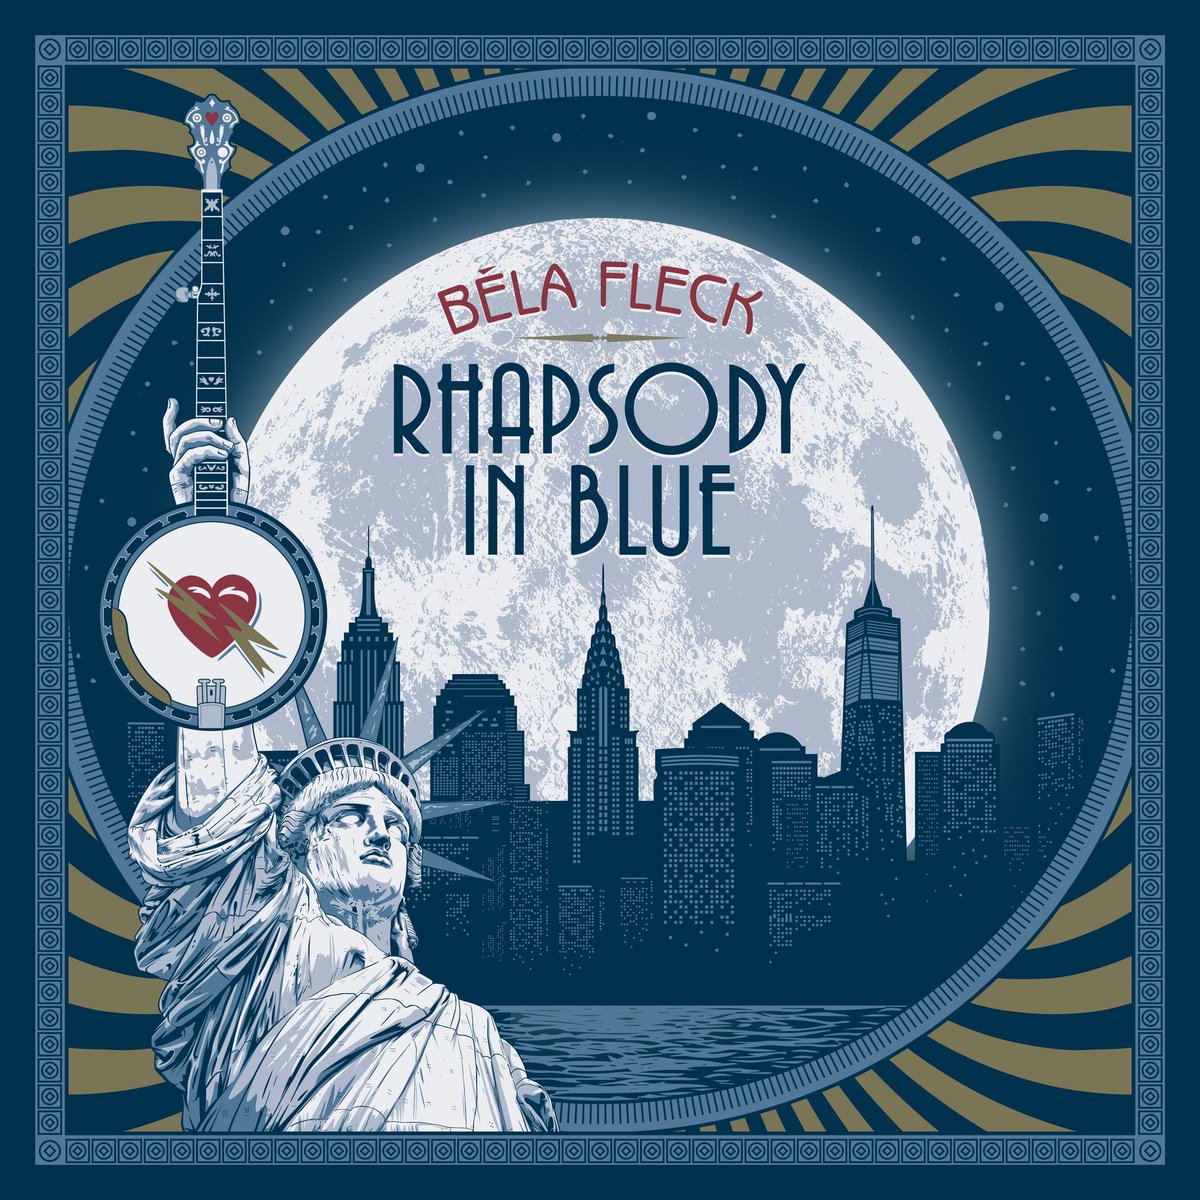 1/ Rhapsody in Blue is out today!! My homage to the legendary composer George Gershwin is out today, 100 years to the day that he premiered the piece at Aeolian Hall in New York City.